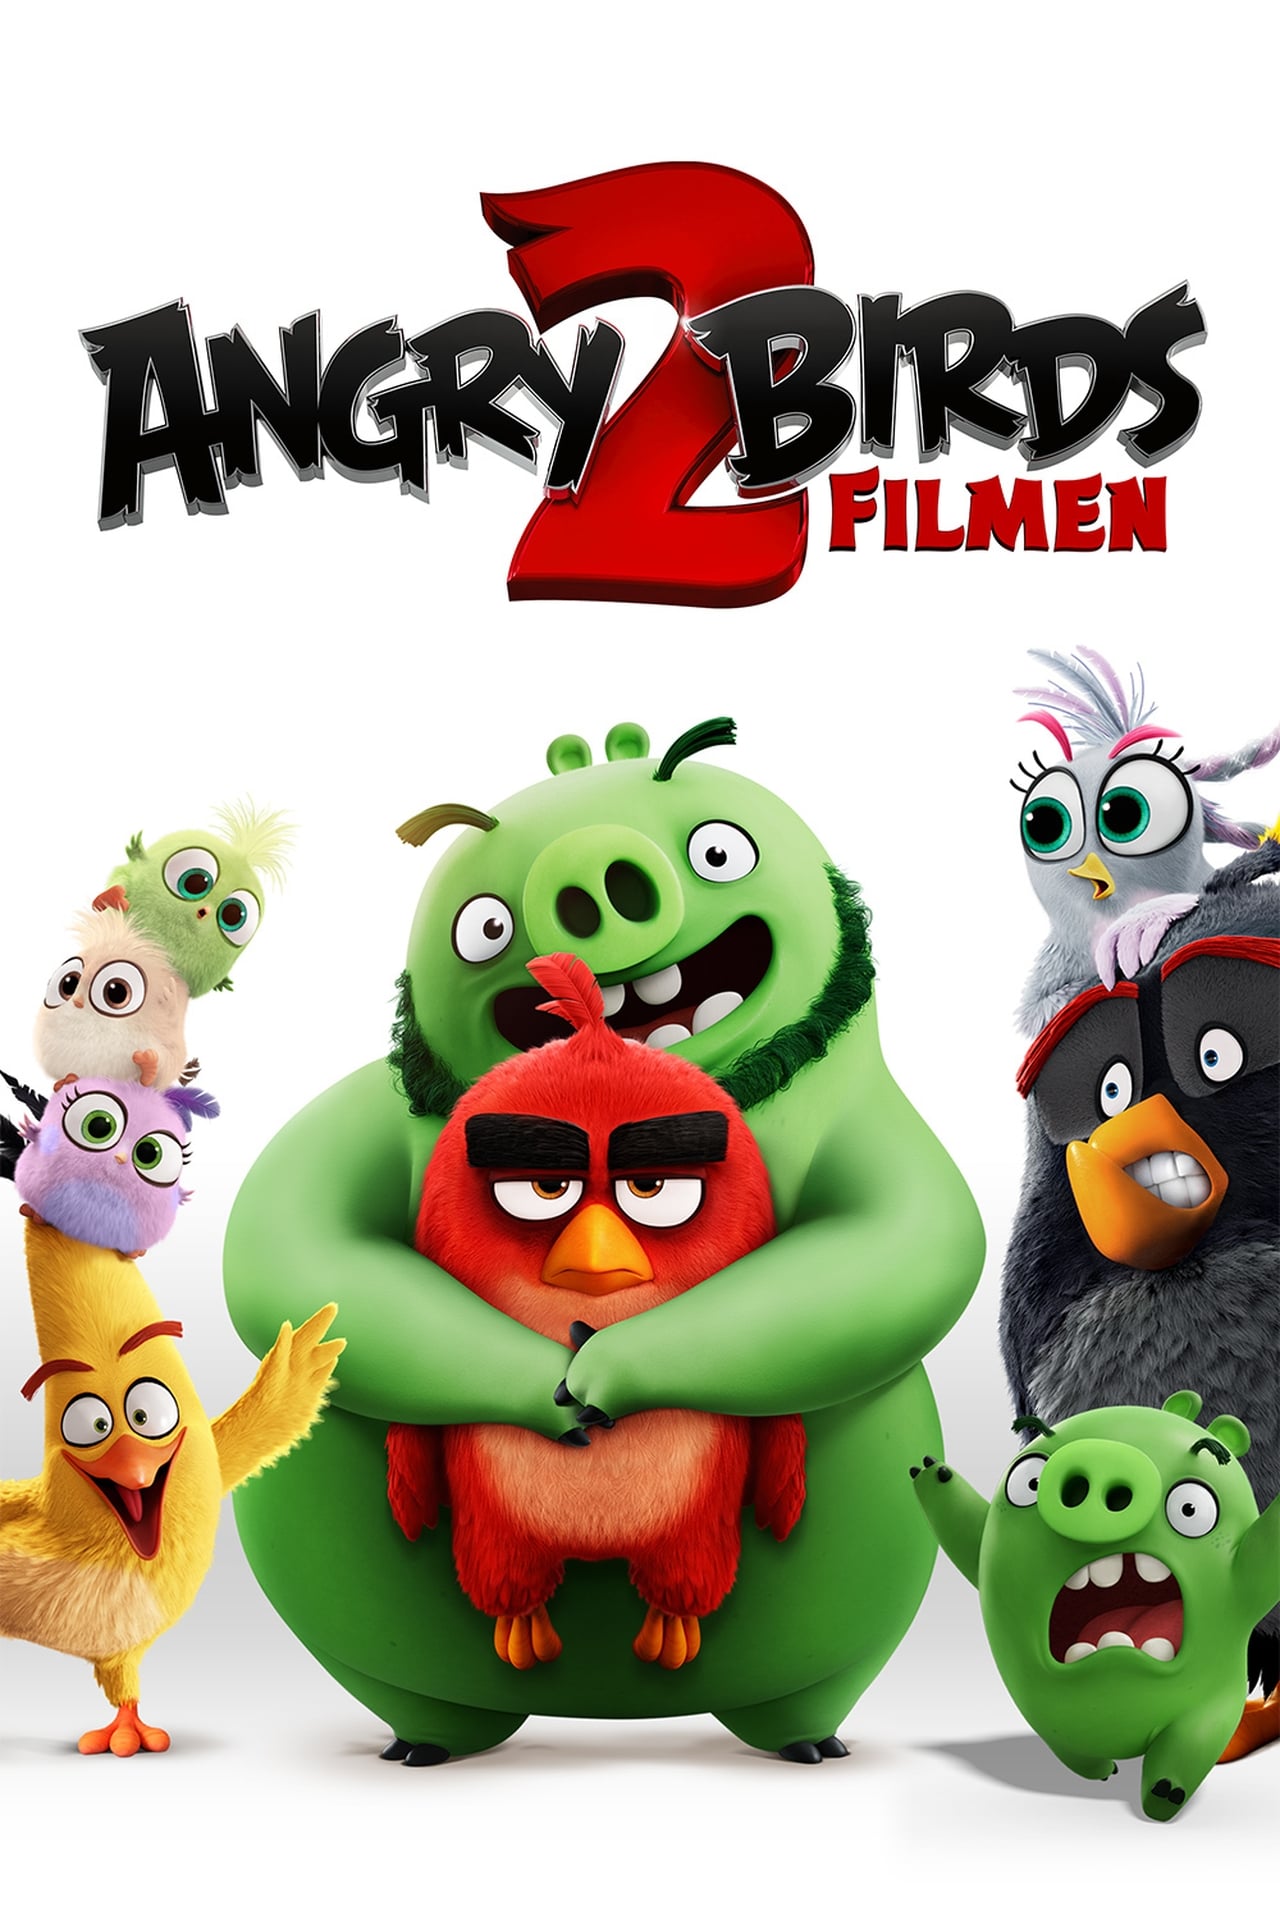 watch angry birds 2 online 123movie